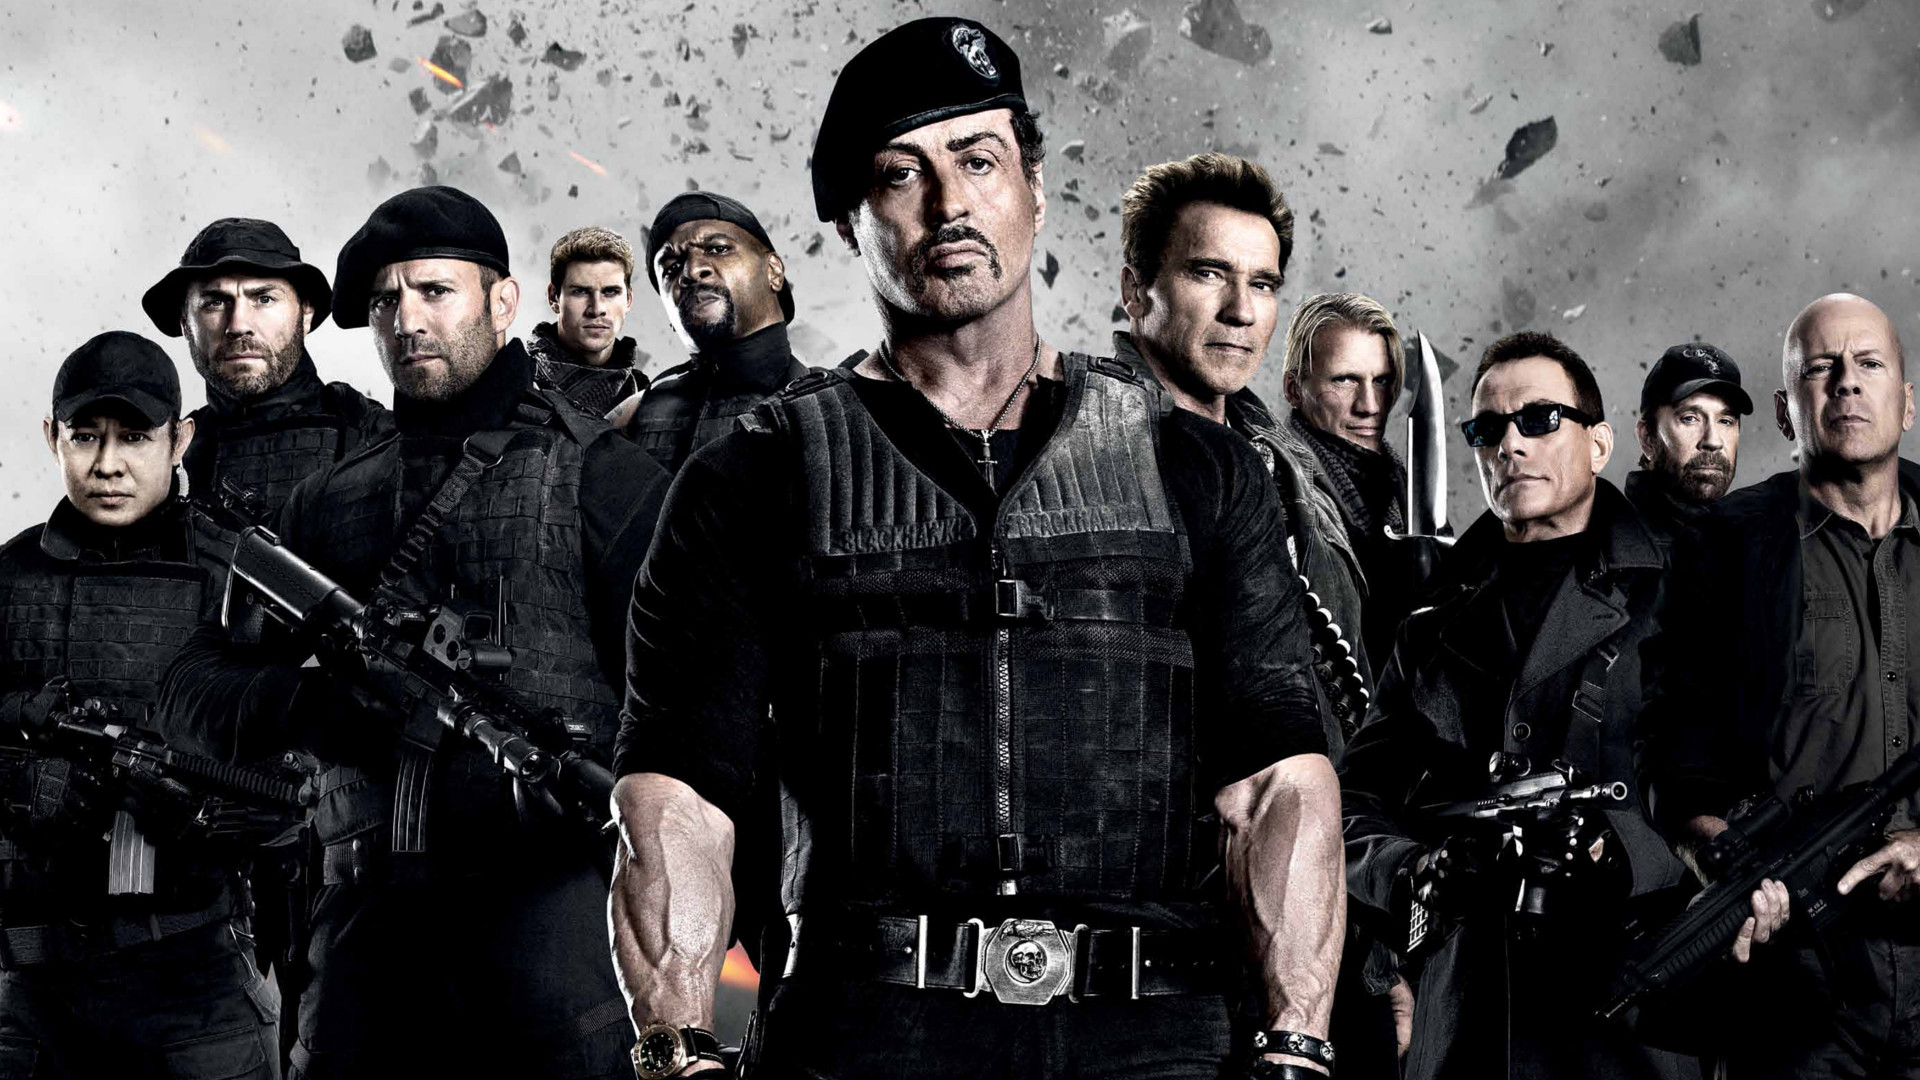 Arnold Schwarzenegger Barney Ross Billy The Expendables Booker The Expendables Bruce Willis Chuck No 1920x1080